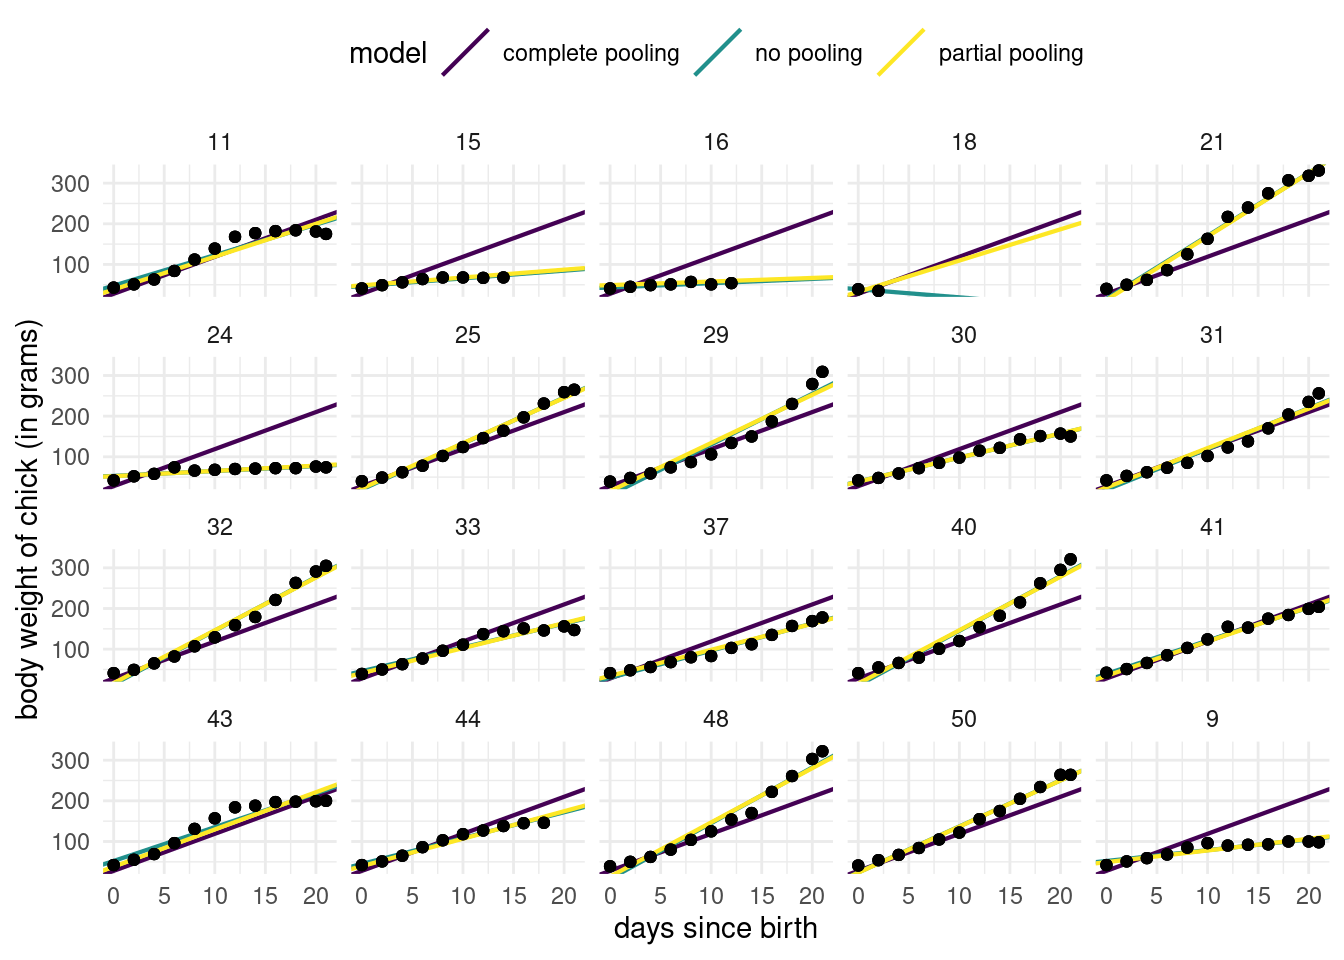 Partial pooling of coefficients for chicken data. Fitted regression lines for the model with a single common slope (complete pooling) and model with chick-specific intercept and slopes (no pooling). The conditional predictions are very close to individual slopes and barely distinguishable, except for chicken with fewer data points were they lie closer to the overall mean, one-size-fits-all model (i.e., complete pooling).